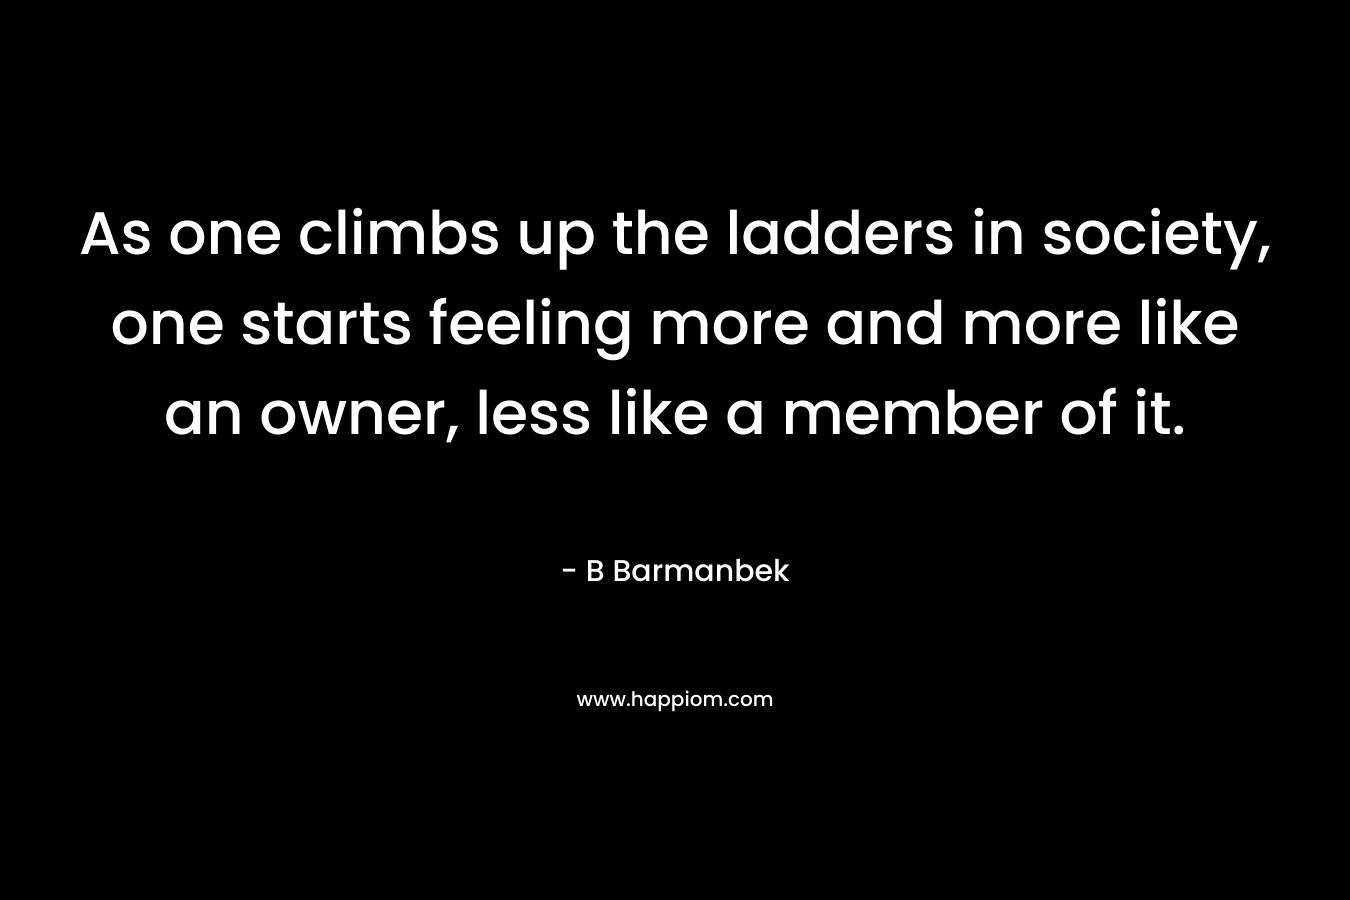 As one climbs up the ladders in society, one starts feeling more and more like an owner, less like a member of it. – B Barmanbek